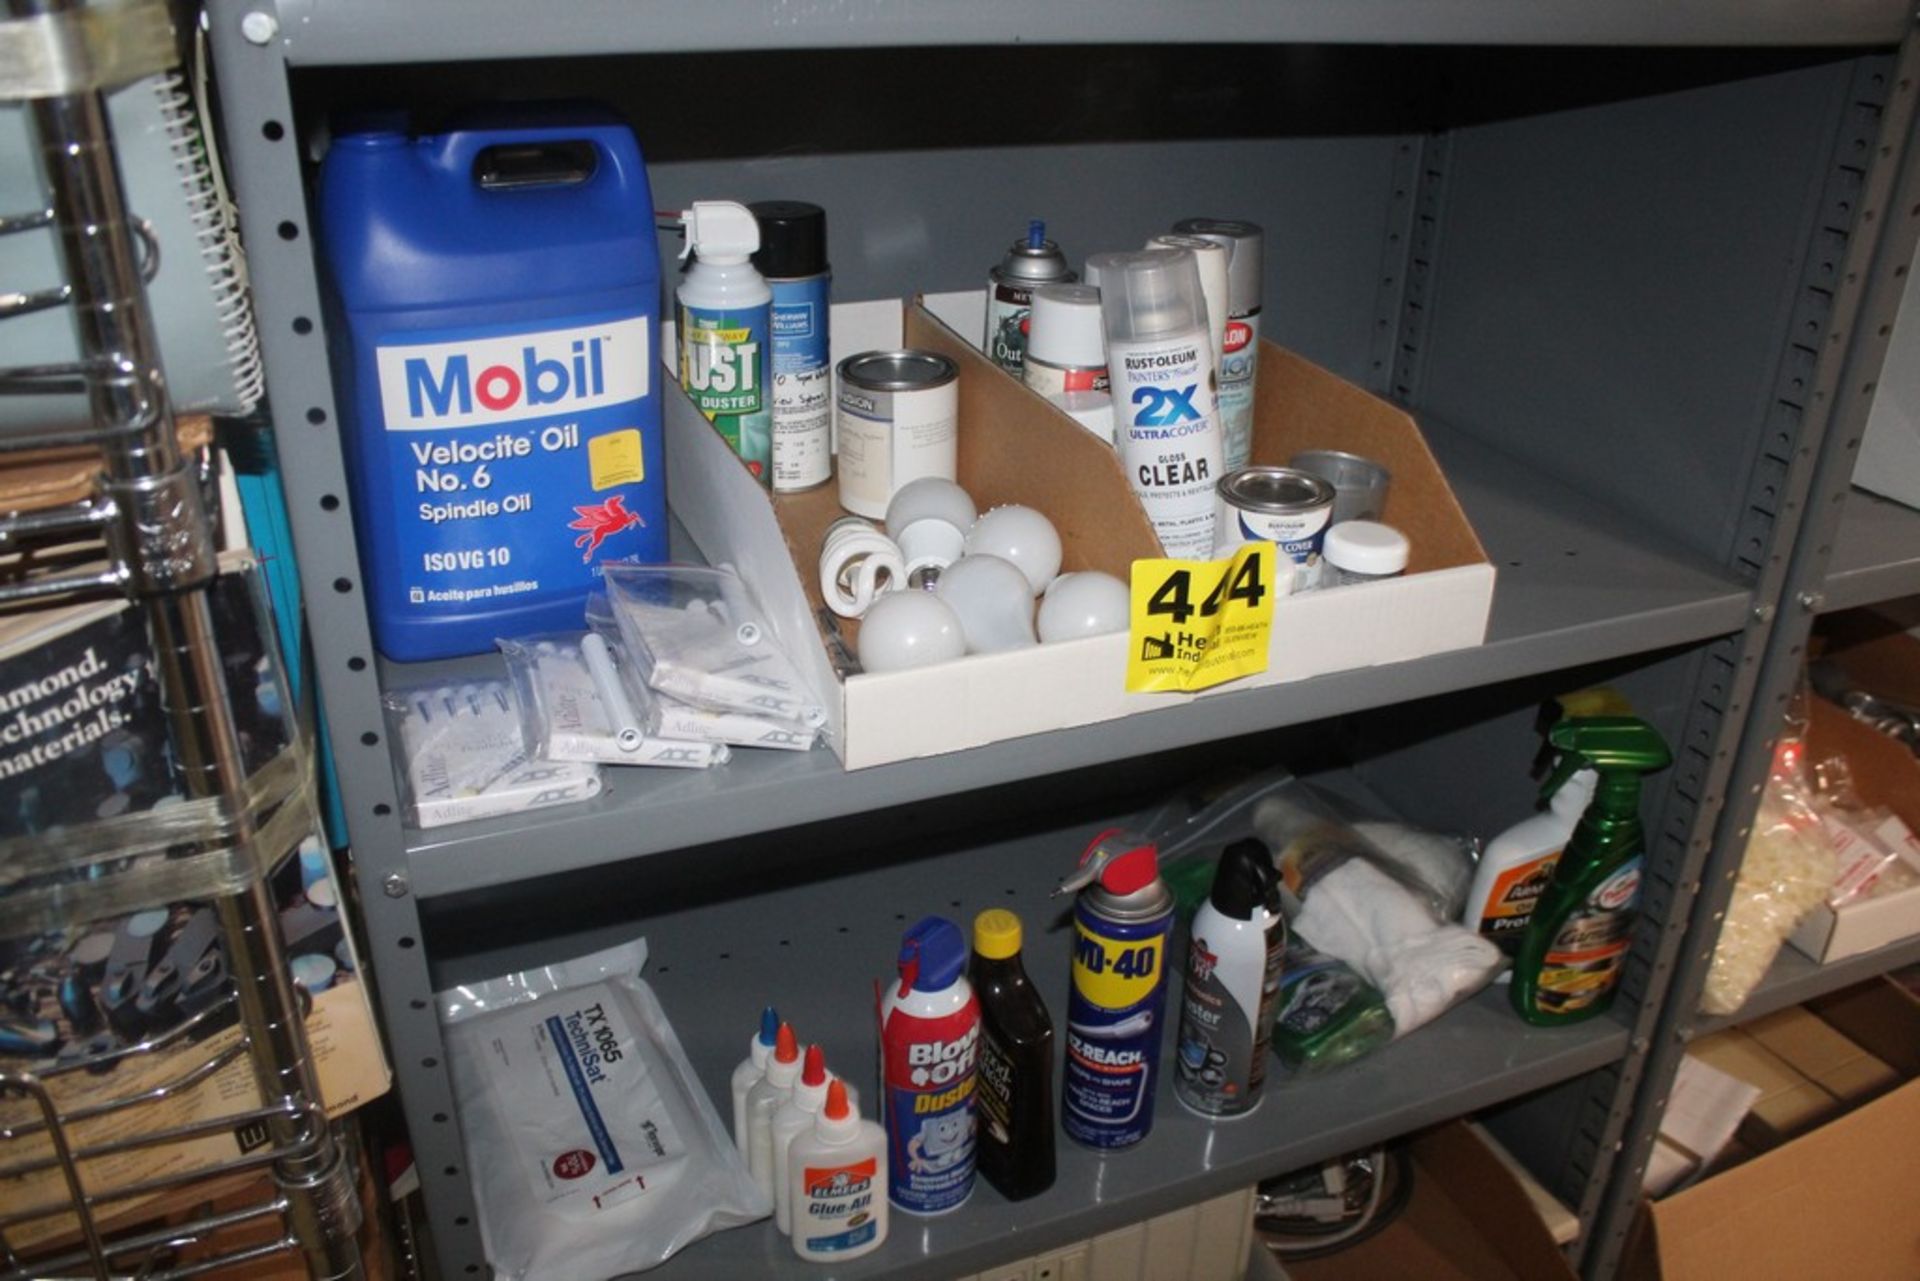 ASSORTED LUBRICANTS, CLEANING SUPPLIES, AUTOMOTIVE TOOLS, ETC. - Image 2 of 3